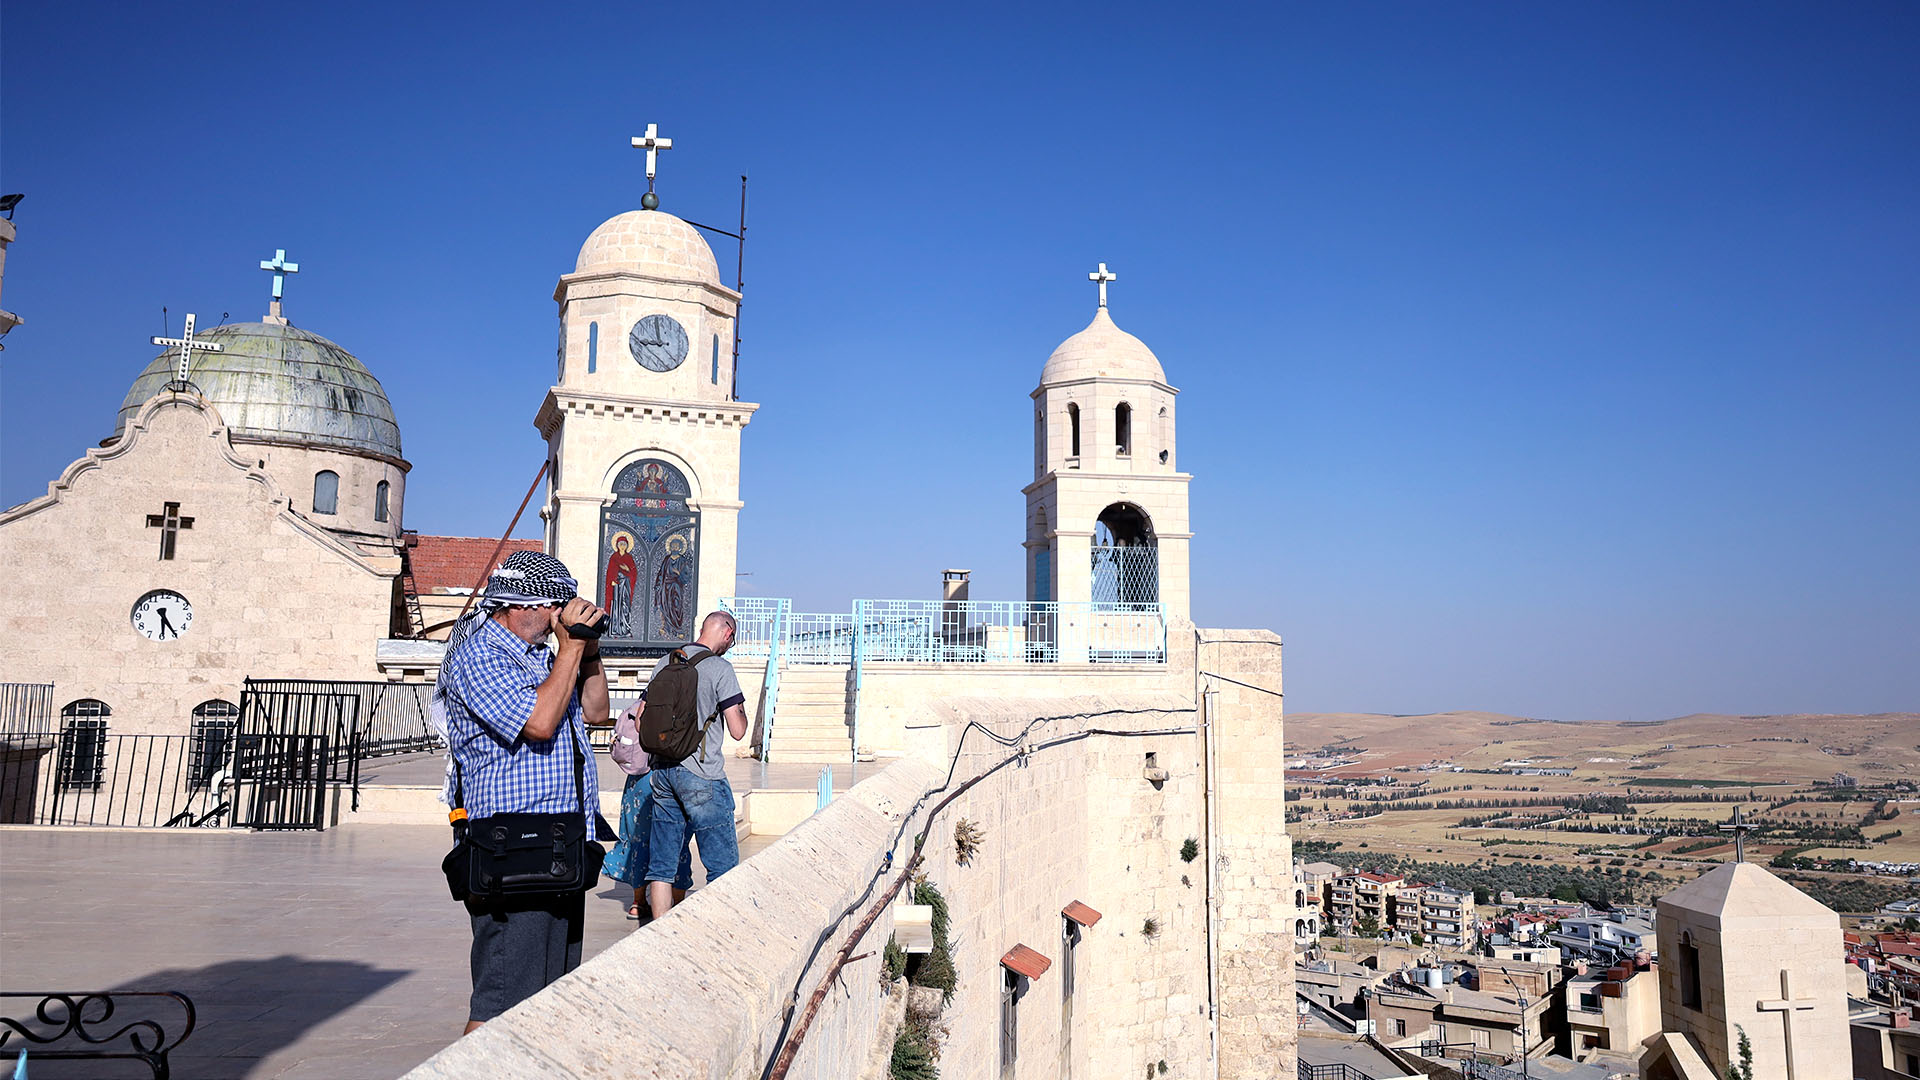 A photograph captures tourists standing on the rooftop of the Convent of Our Lady of Sednaya, enjoying the breathtaking views from the elevated vantage point.